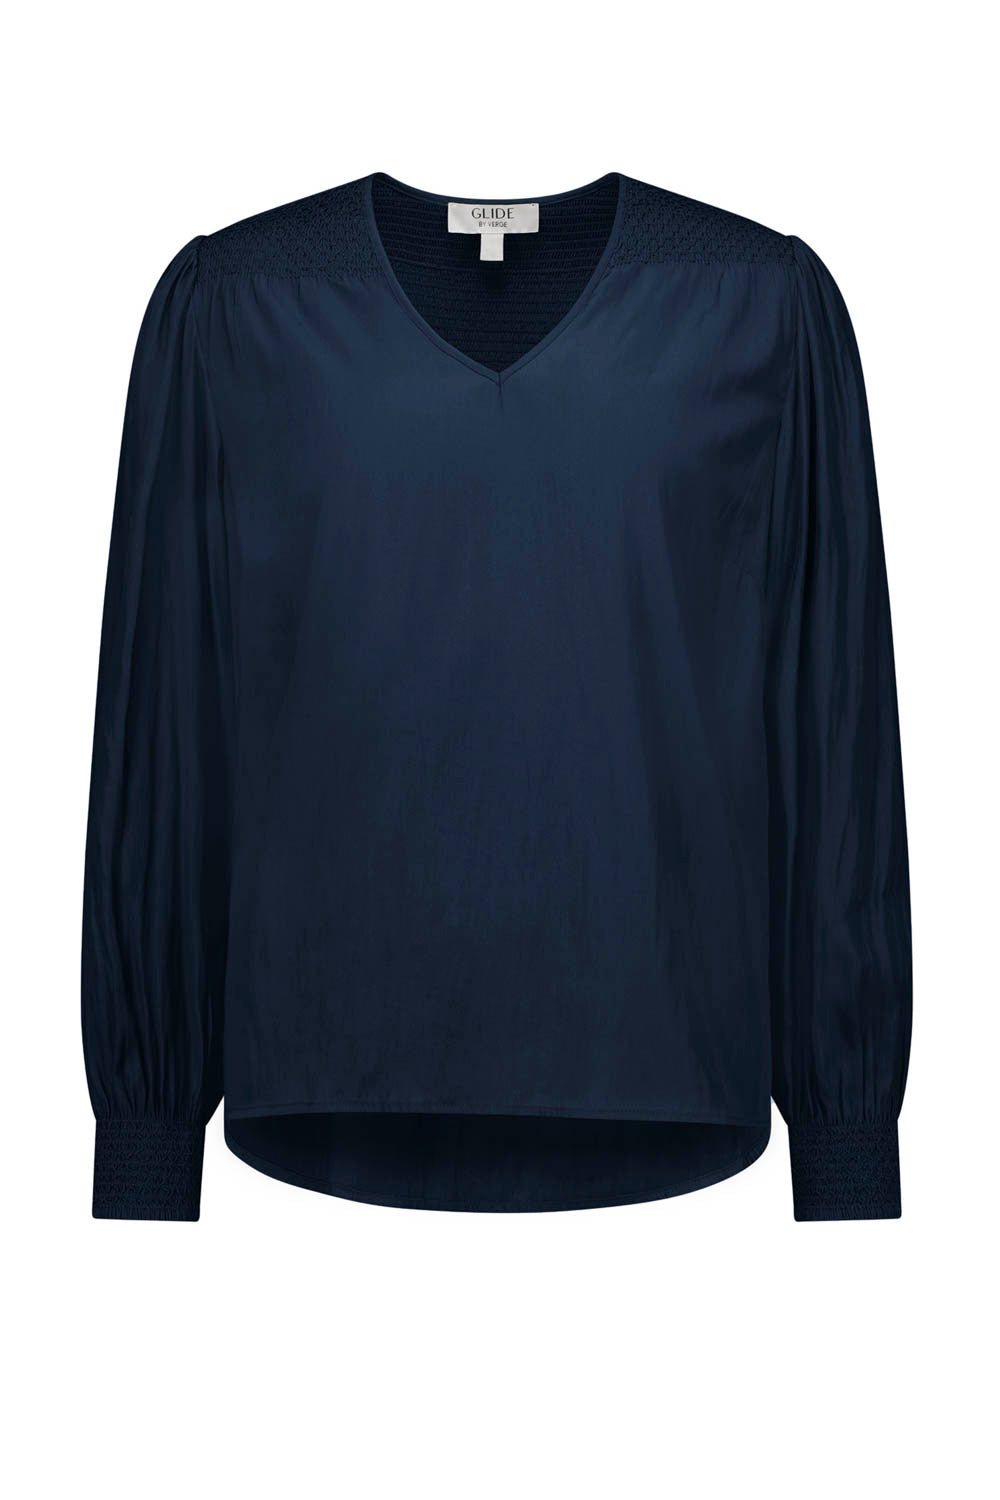 Glide by Verge - Tangled Blouse - Midnight - Blouse VERGE